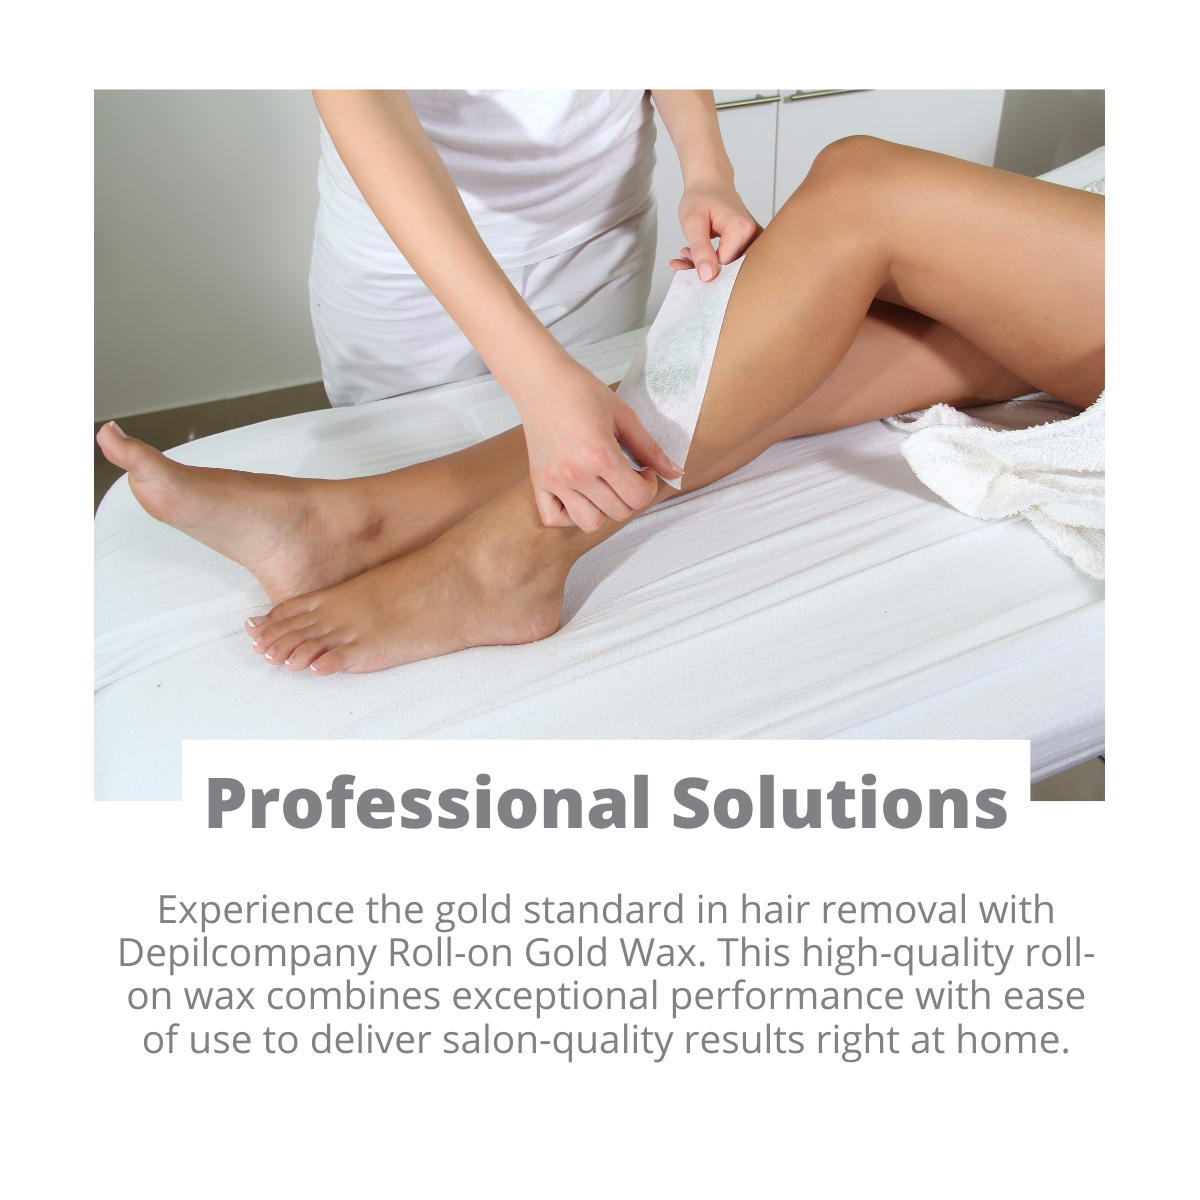 Professional hair removal solutions with Roll-on Gold wax